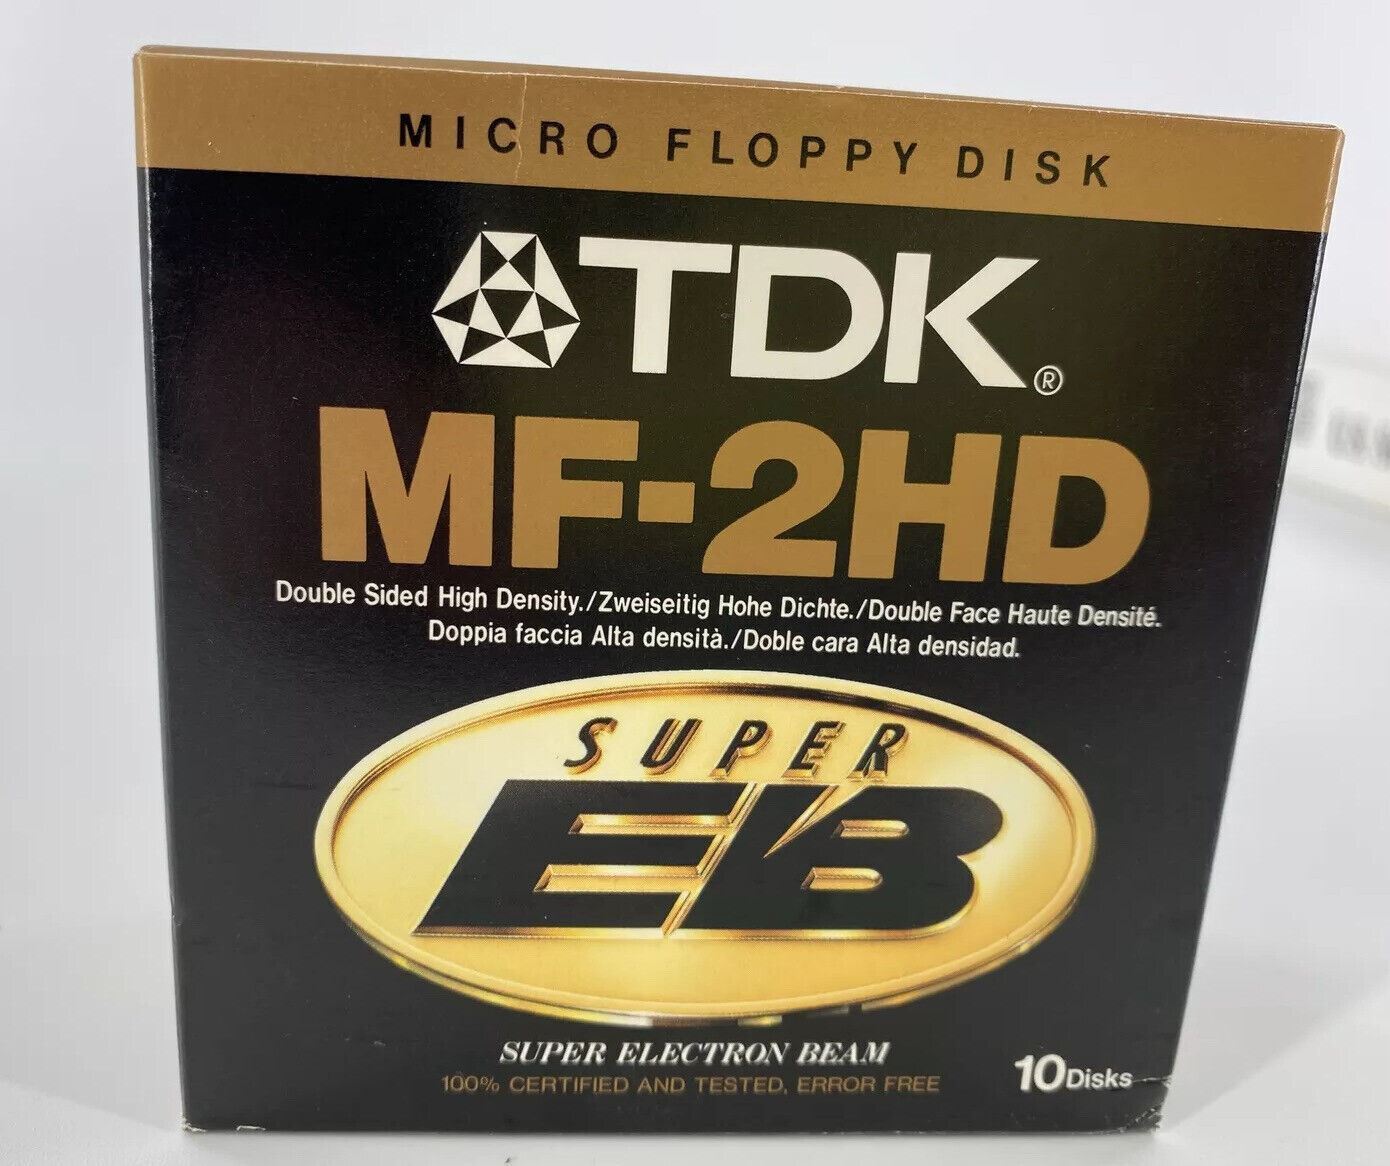 TDK MF-2HD Micro Floppy Disks 10 Pack Storage Double Sided Super EB NEW IN PKG